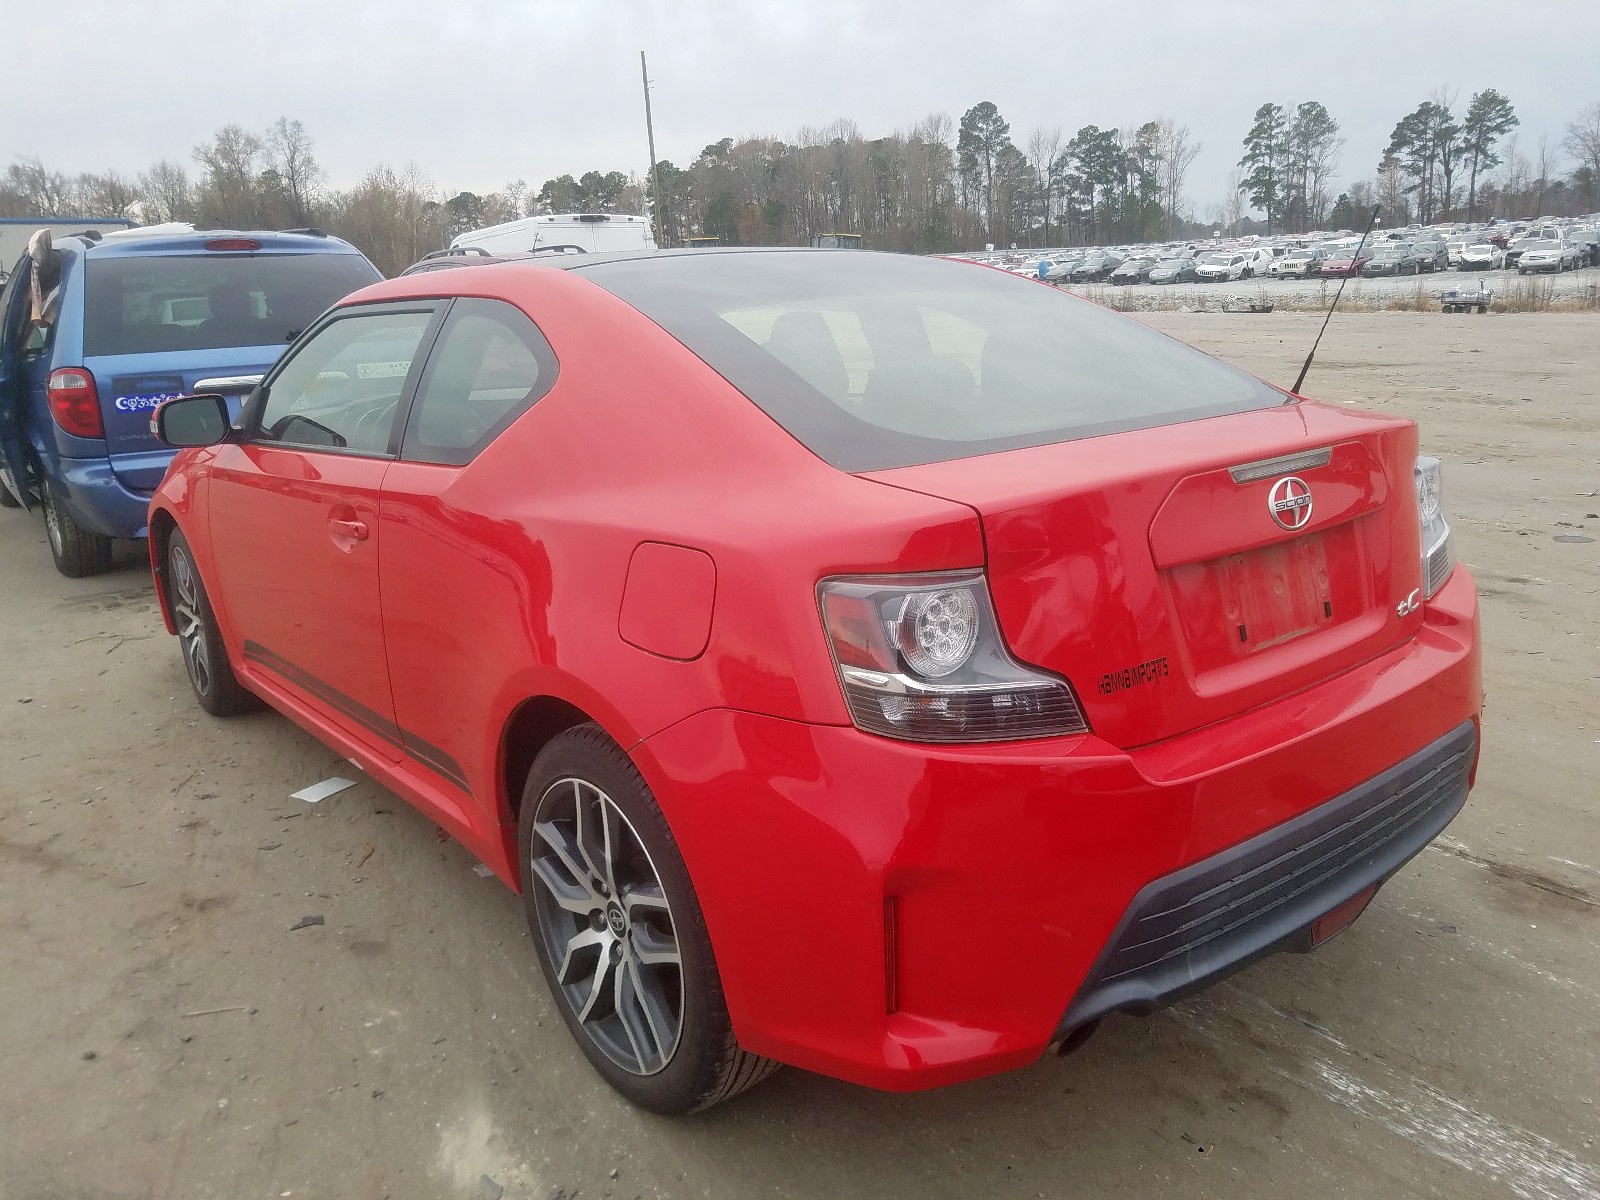 2015 Toyota Scion Tc 2.5L 4 in NC - Raleigh (JTKJF5C75F3089380) for ...